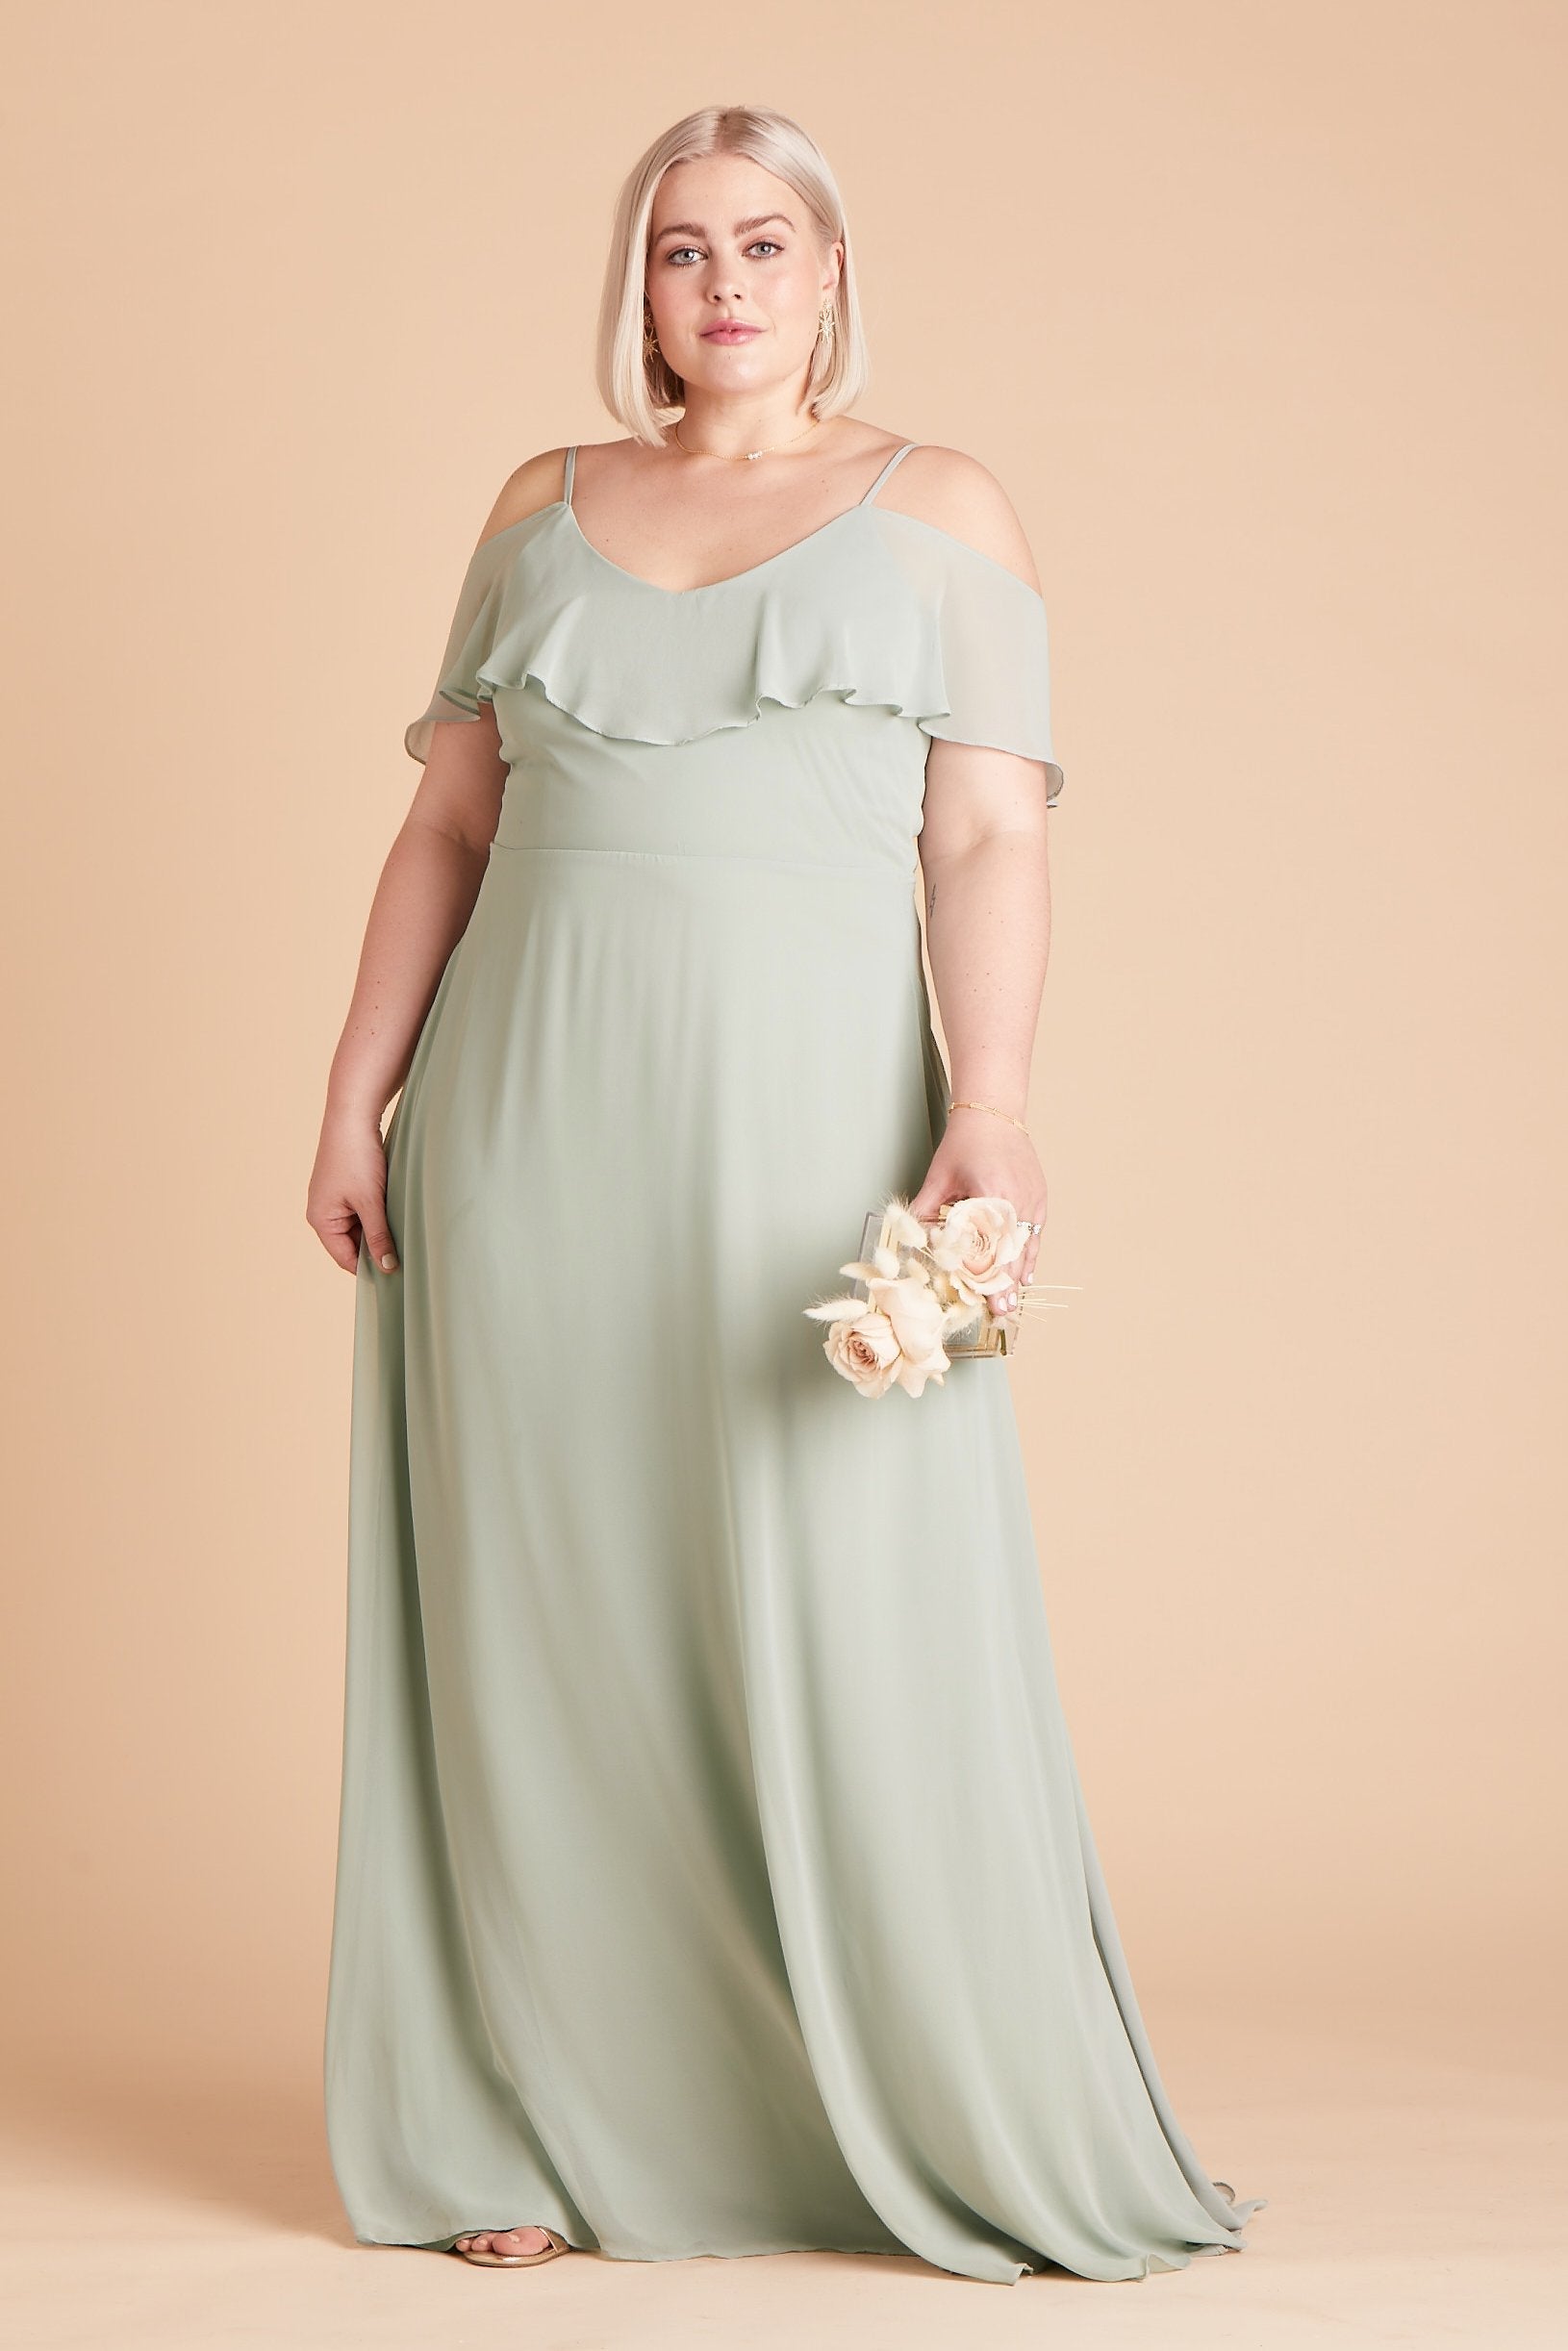 Jane convertible plus size bridesmaid dress in sage green chiffon by Birdy Grey, front view